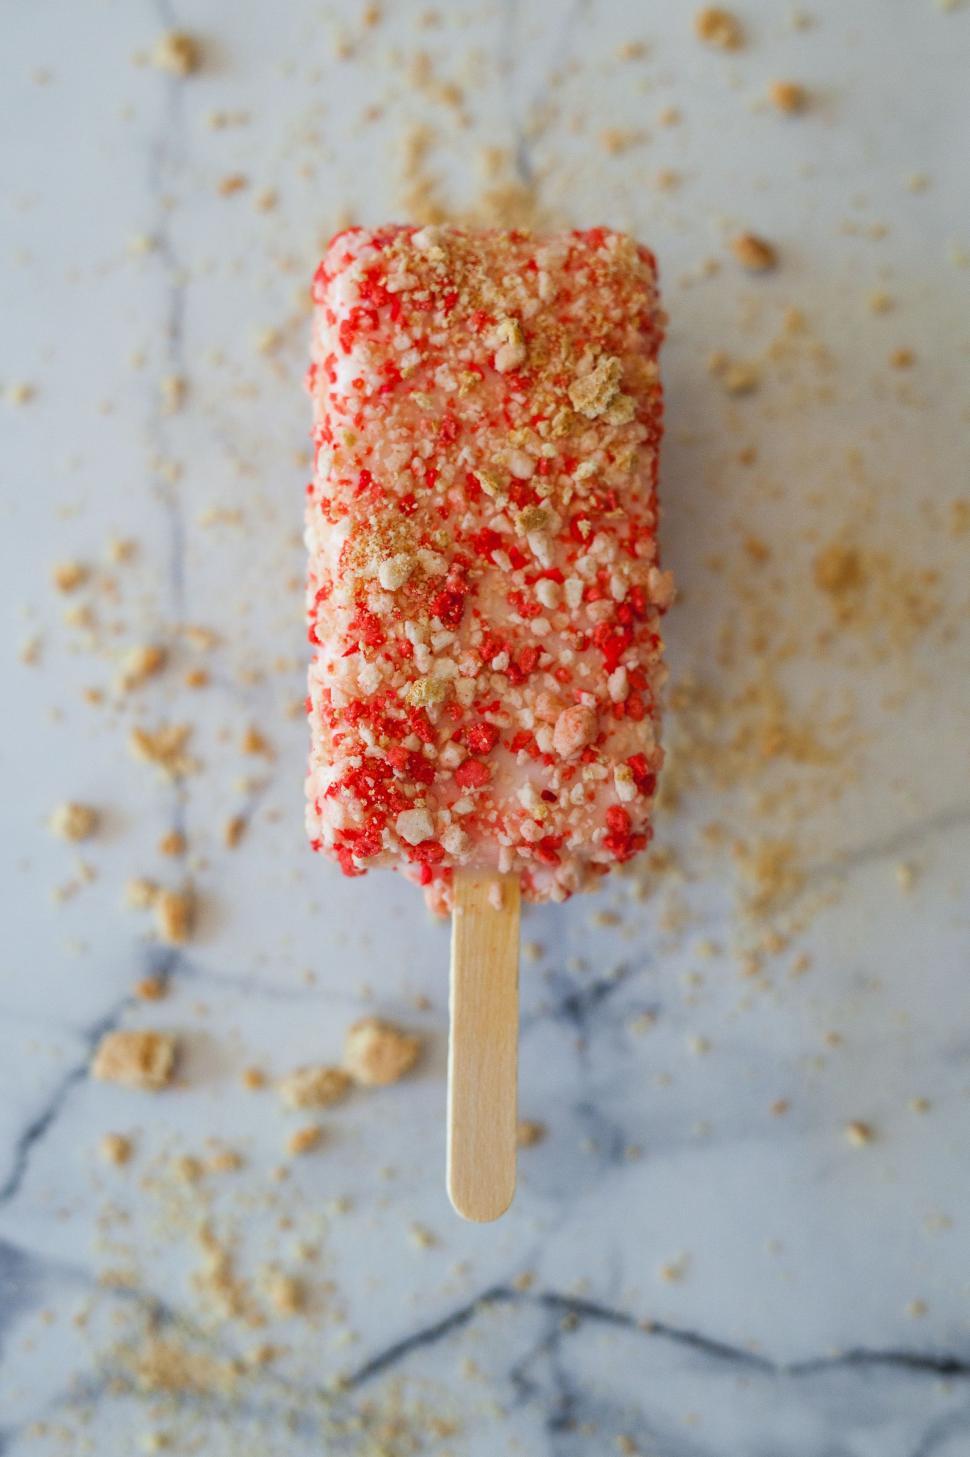 Free Image of Popsicle 